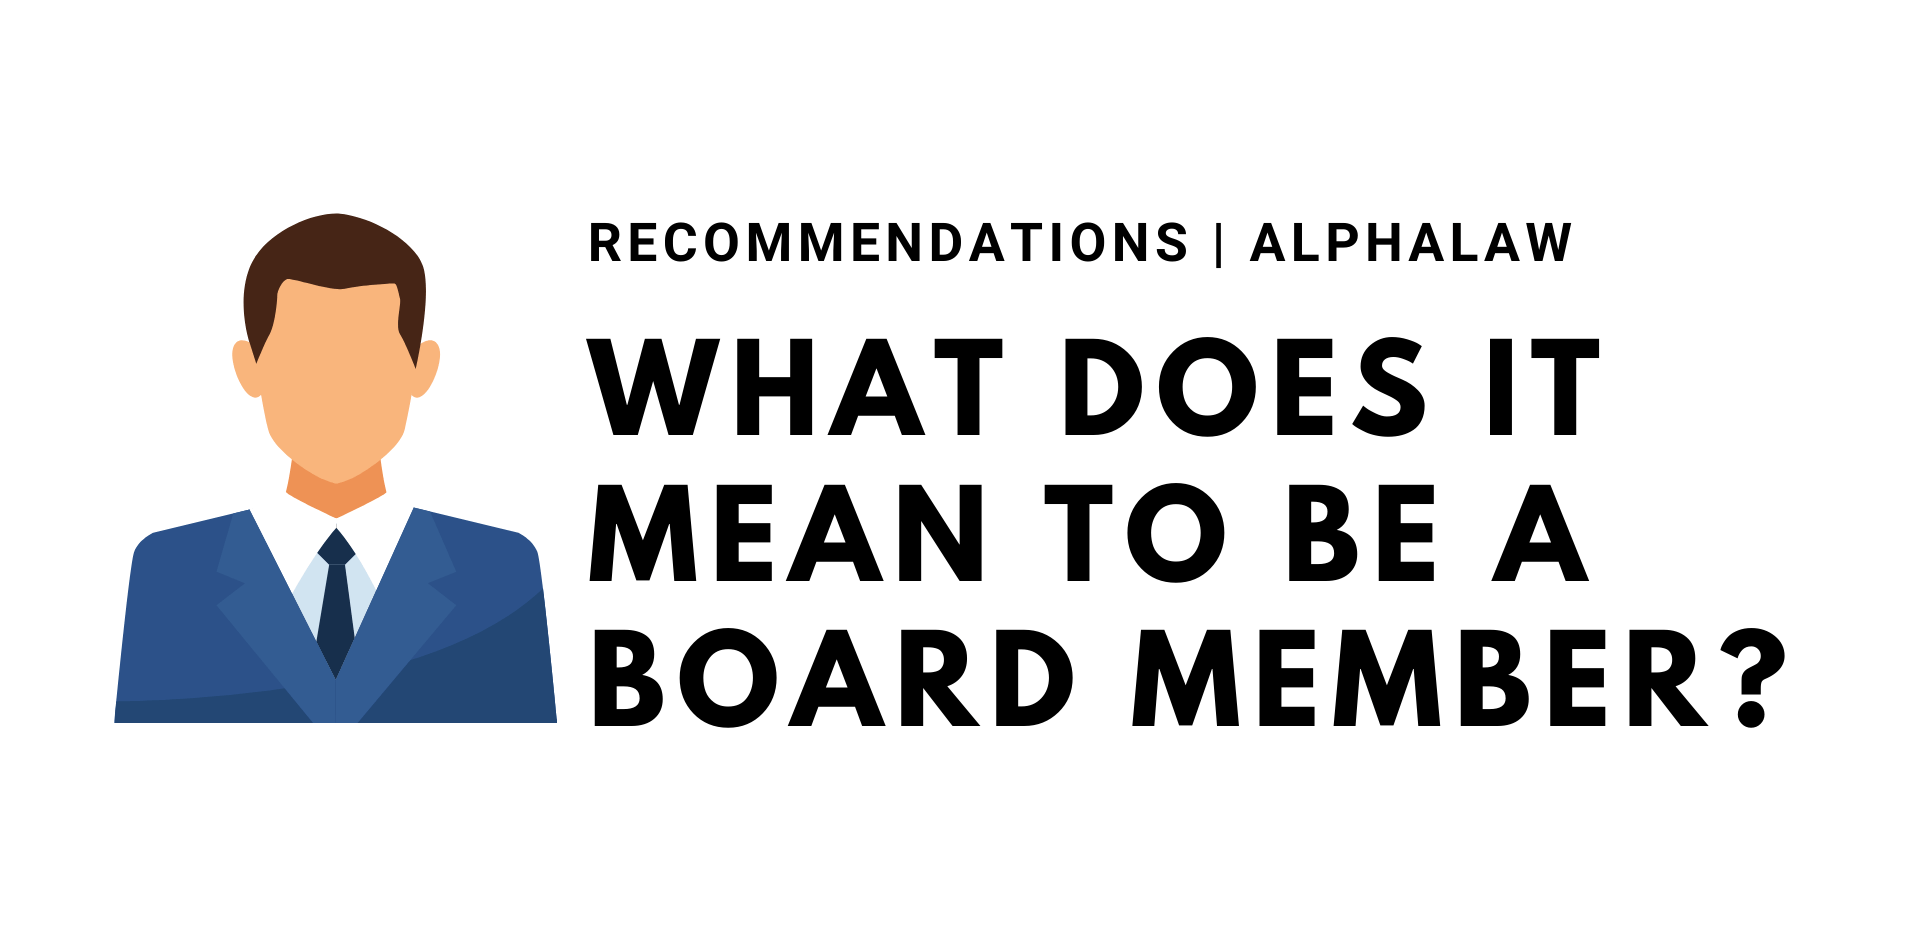 What Does It Mean to be a Board Member?